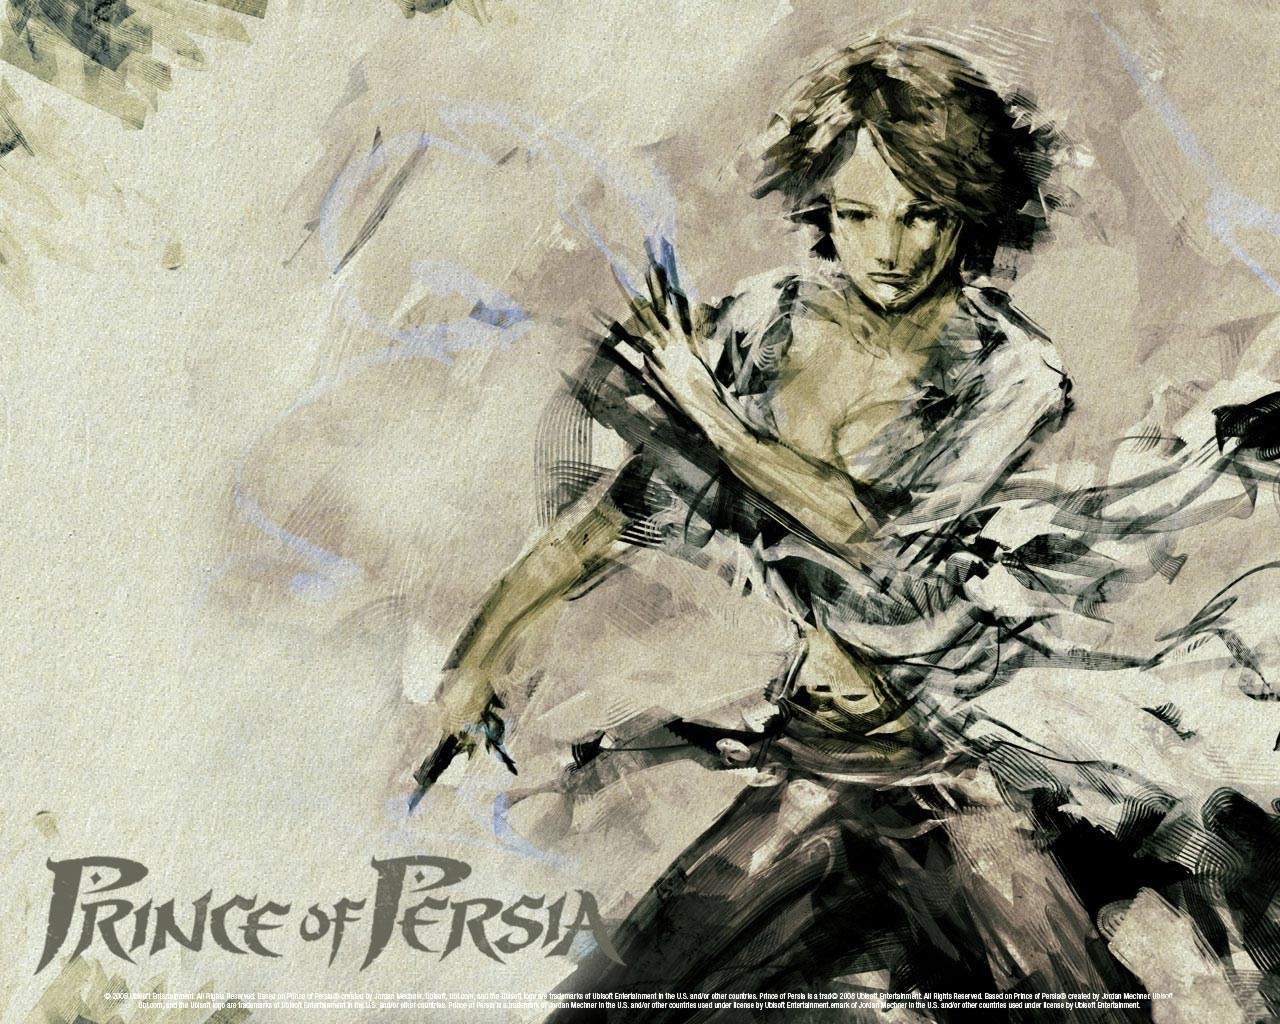 Download full size Prince of Persia wallpaper / Games / 1280x1024